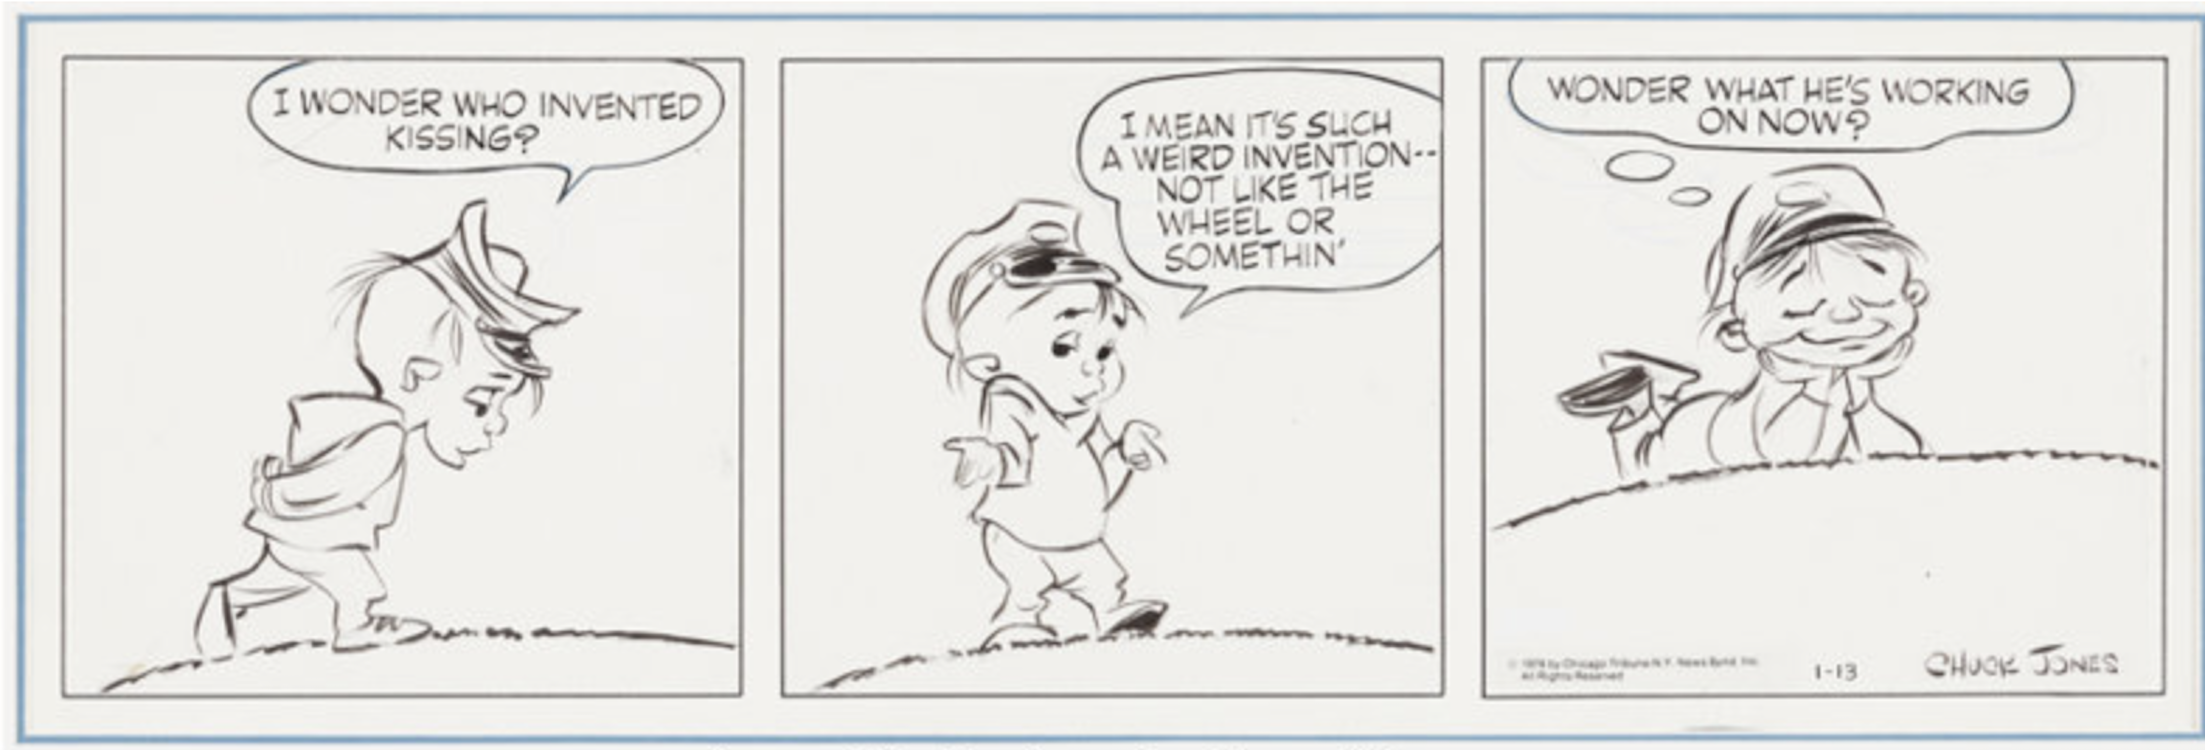 Crawford Comic Strip 1-13-78 by Chuck Jones sold for $3,350. Click here to get your original art appraised.